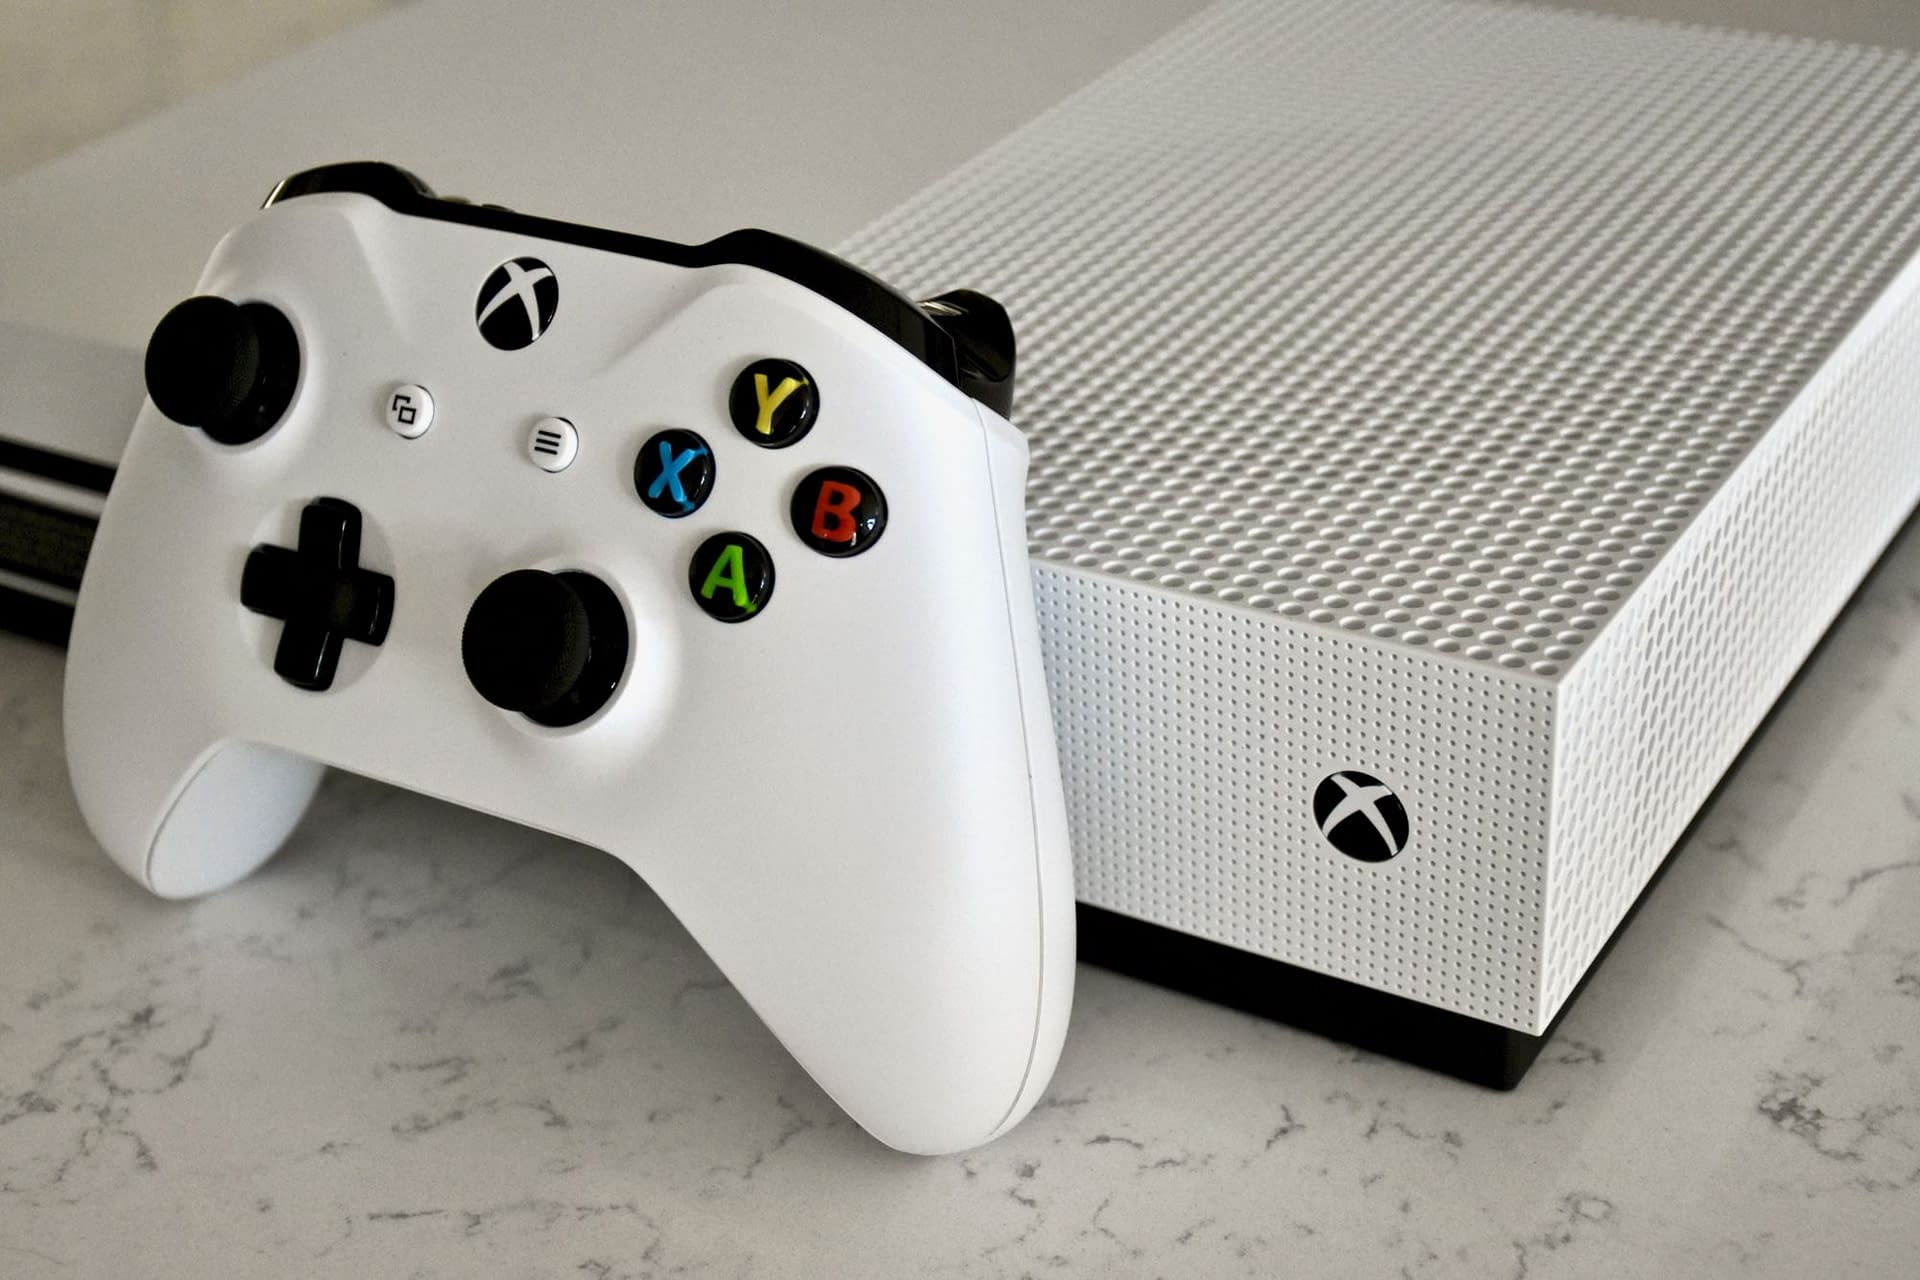 Xbox One X and Xbox One S All-Digital discontinued ahead of Xbox Series X  release